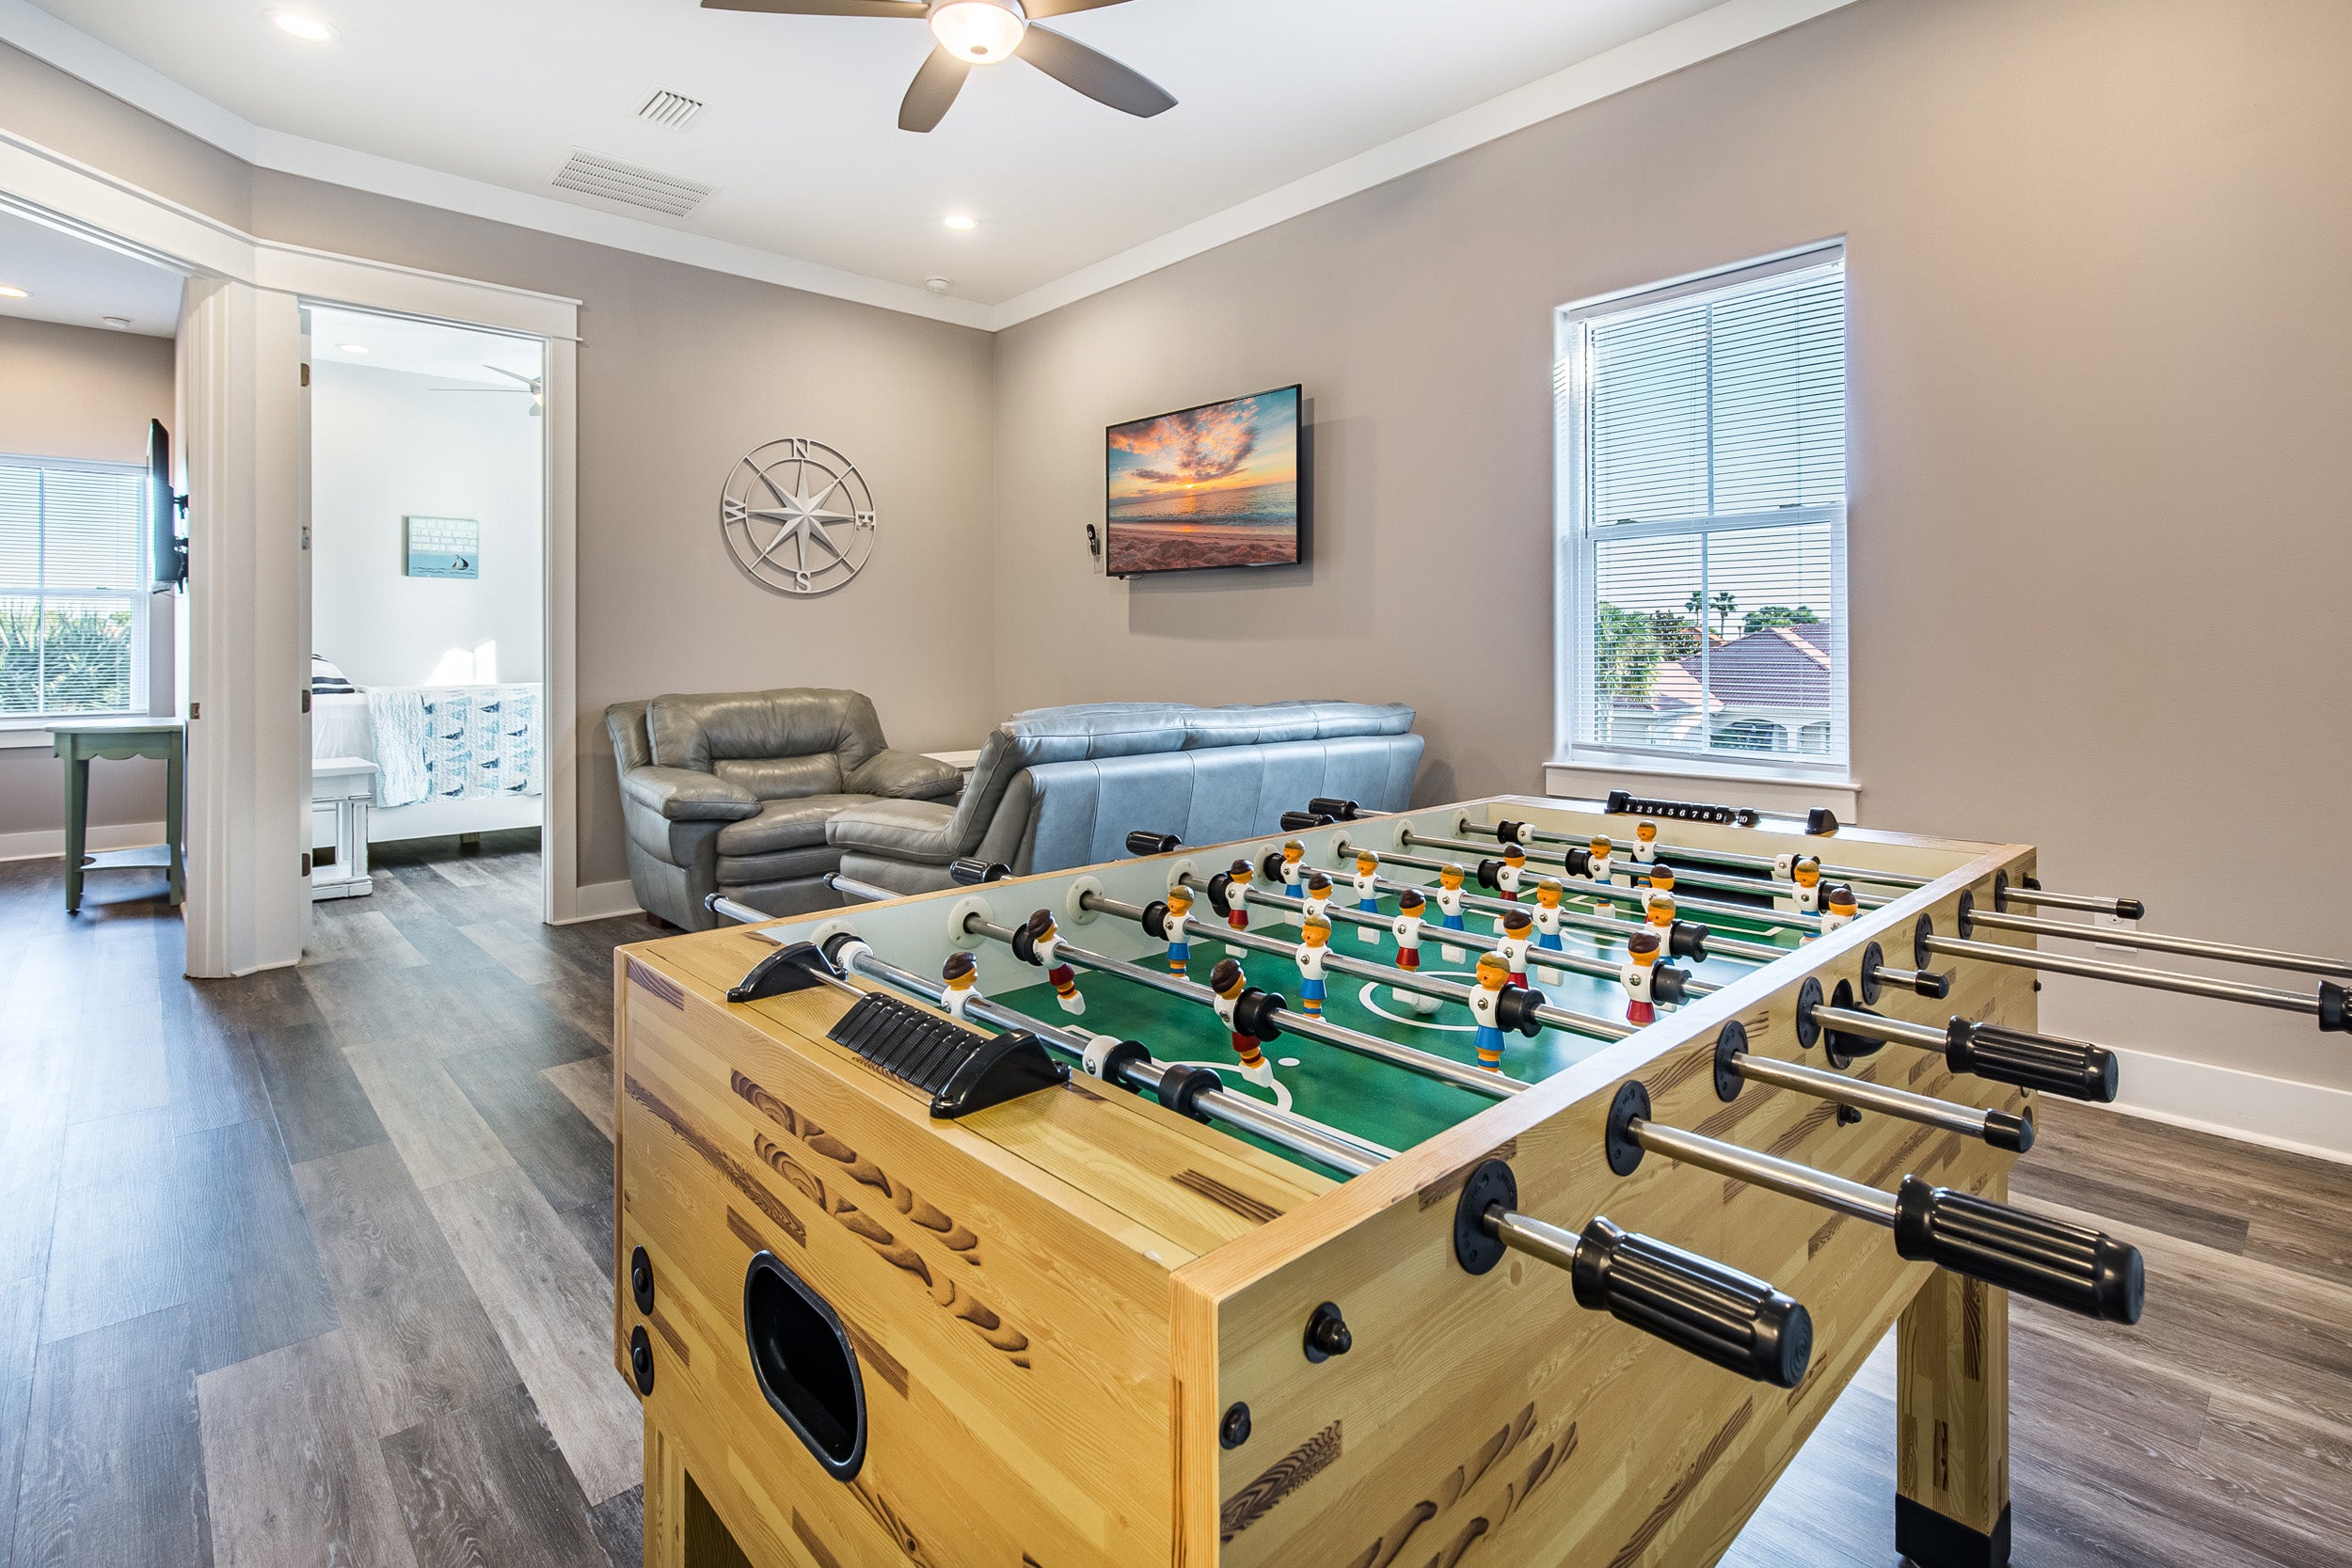 Play a game of foosball or watch some TV!